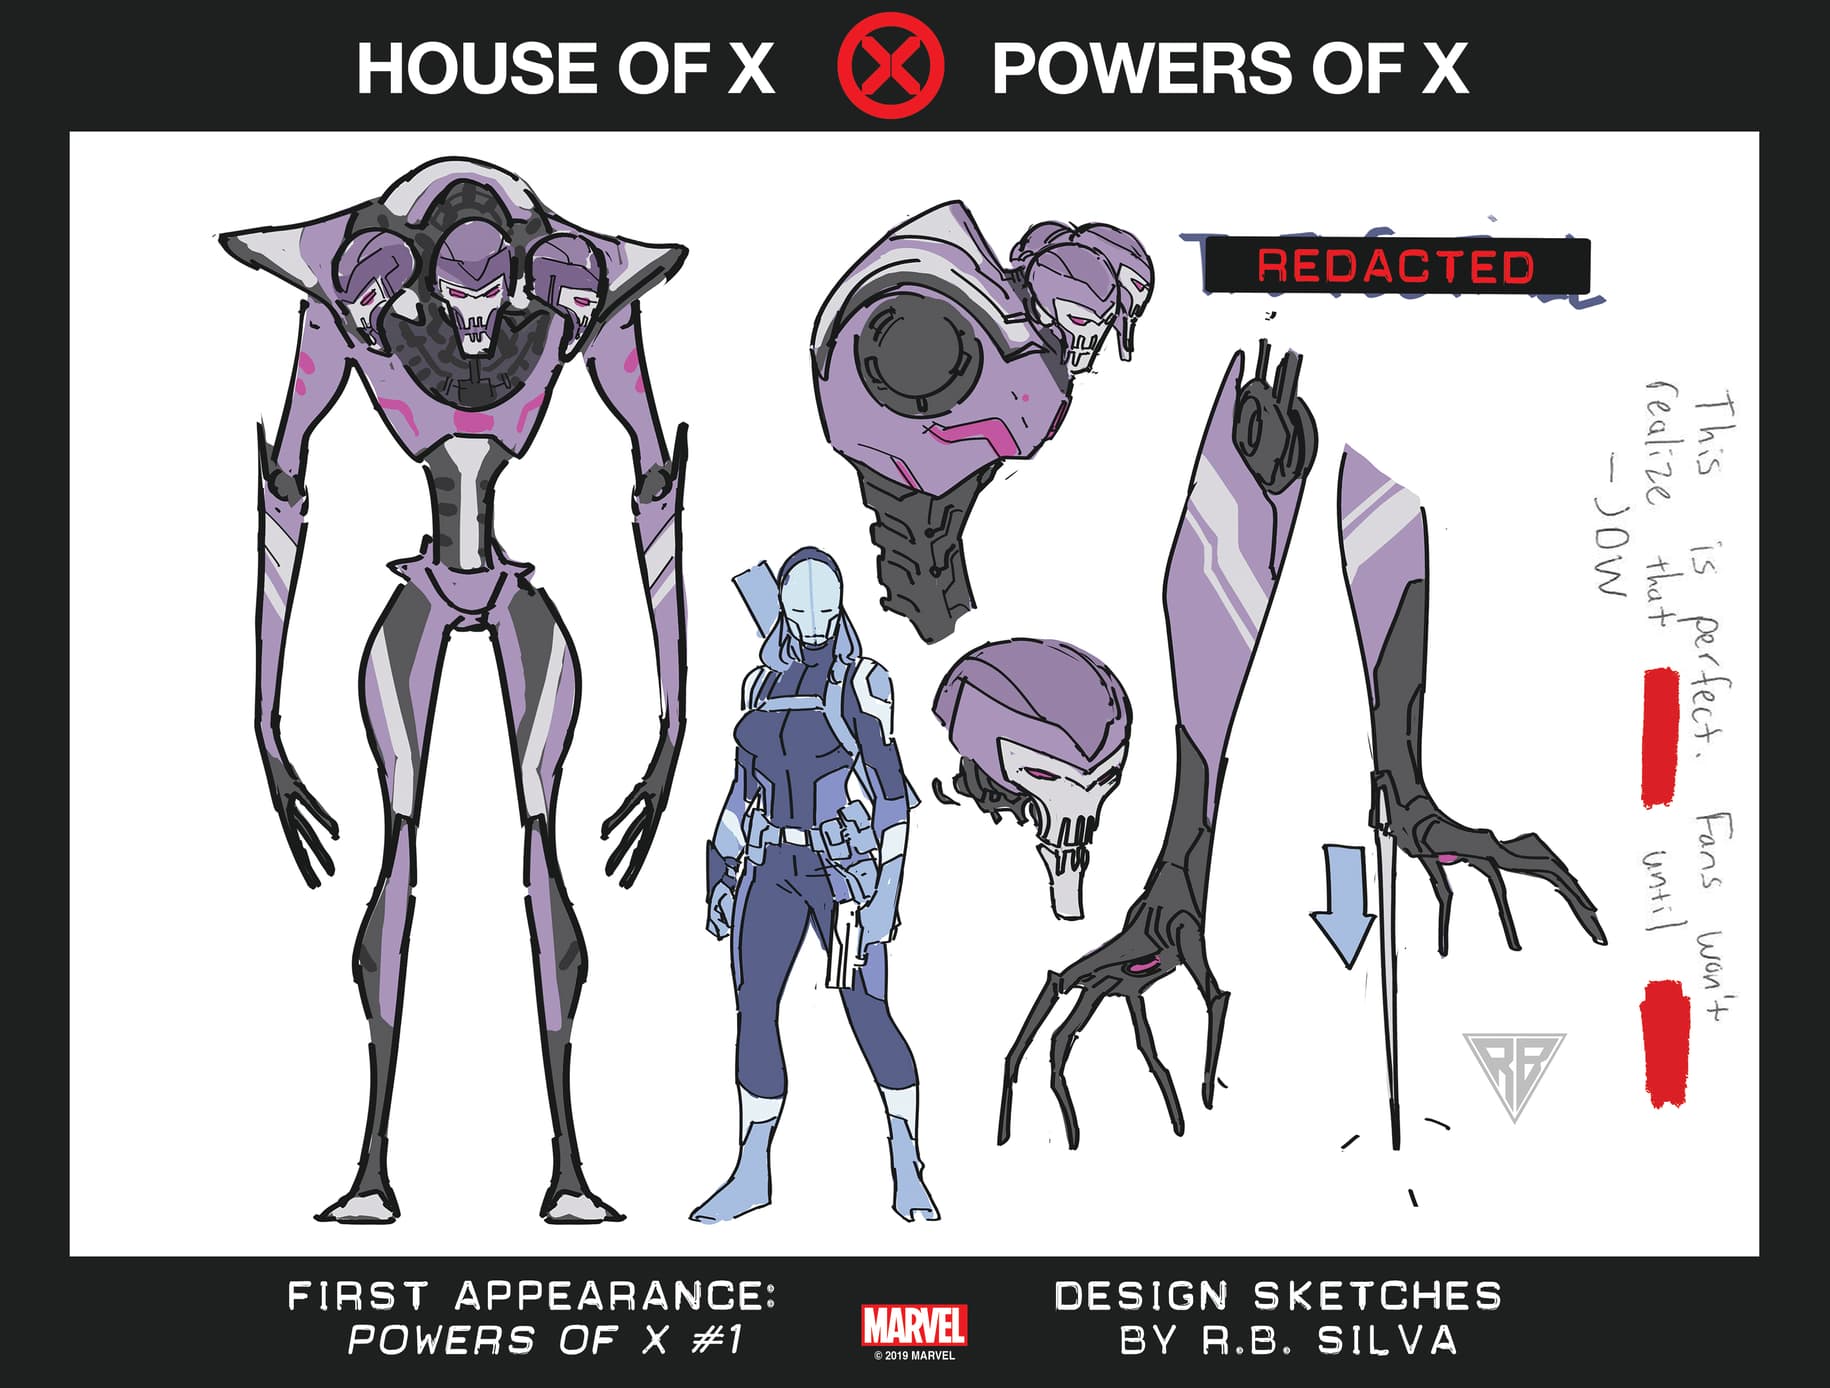 'House of X' and 'Powers of X'